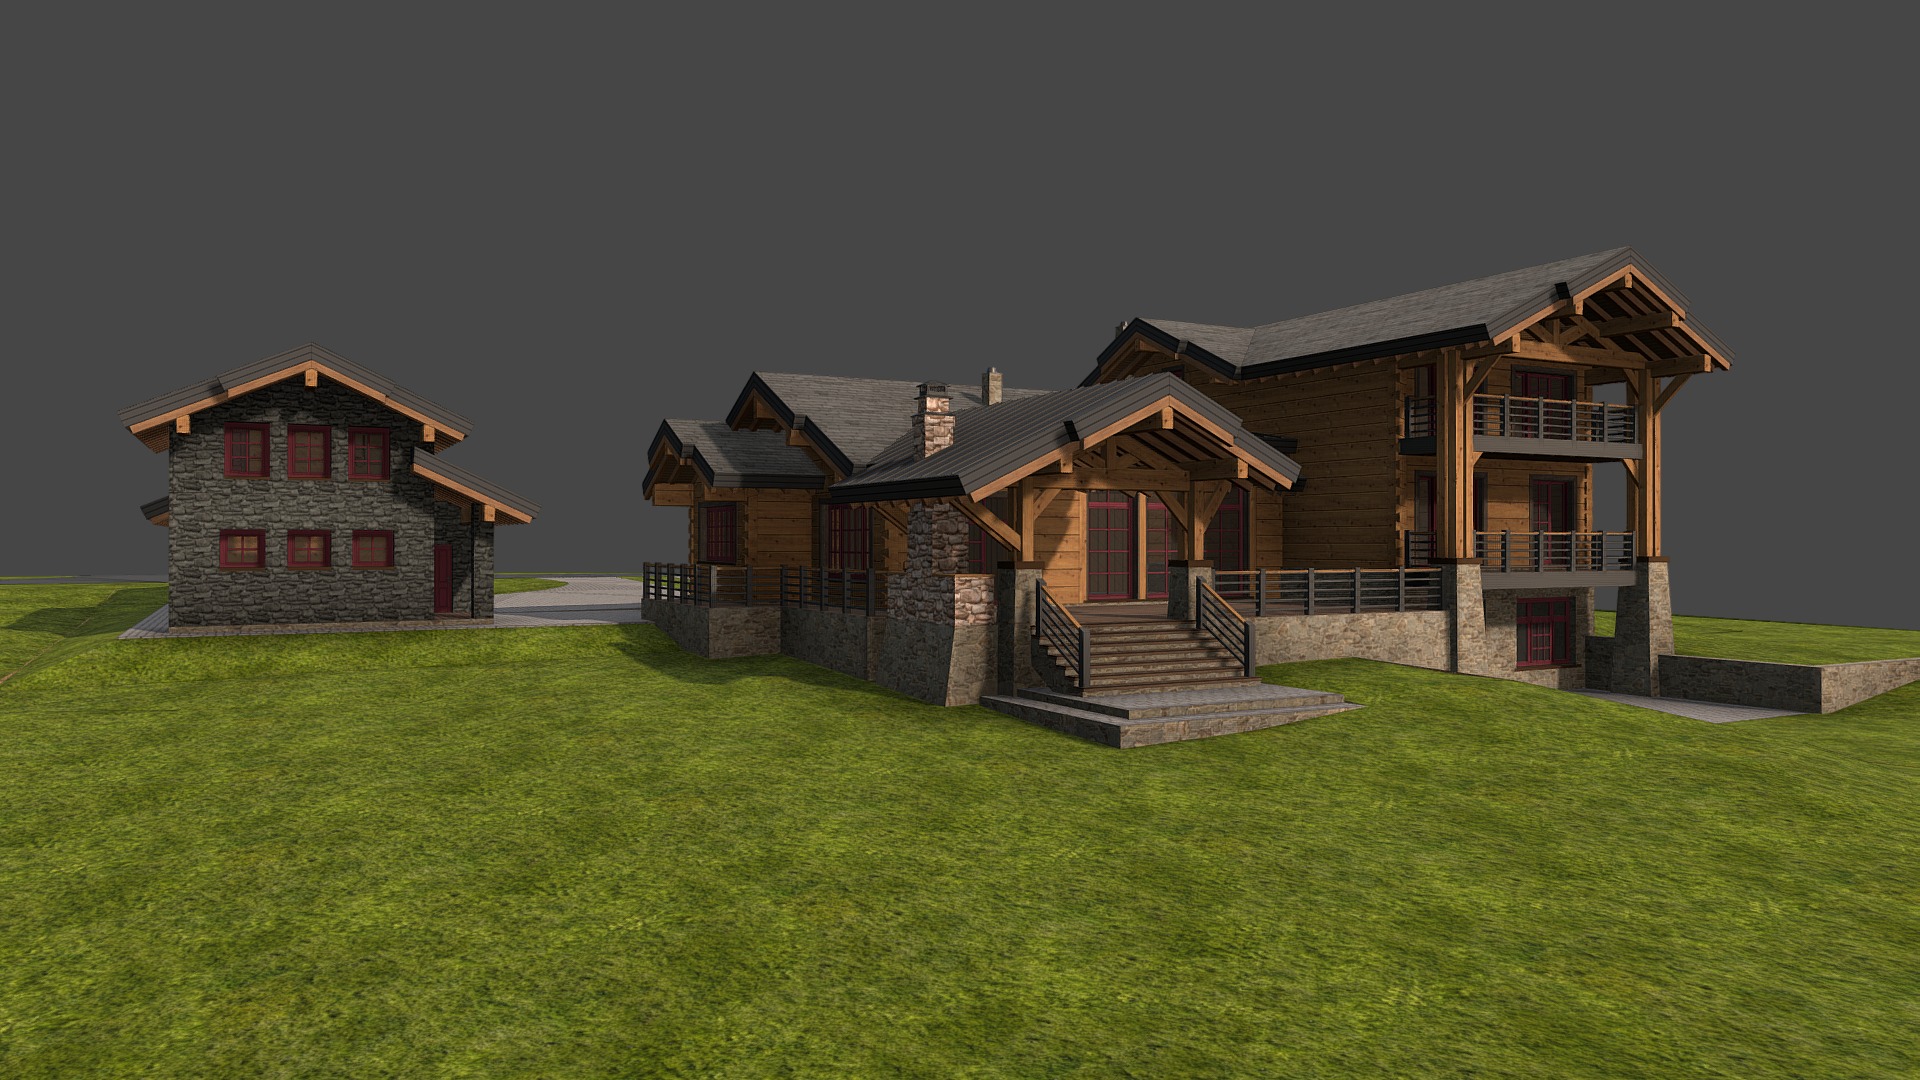 3D model Проект дома №2 - This is a 3D model of the Проект дома №2. The 3D model is about a house with a large lawn.